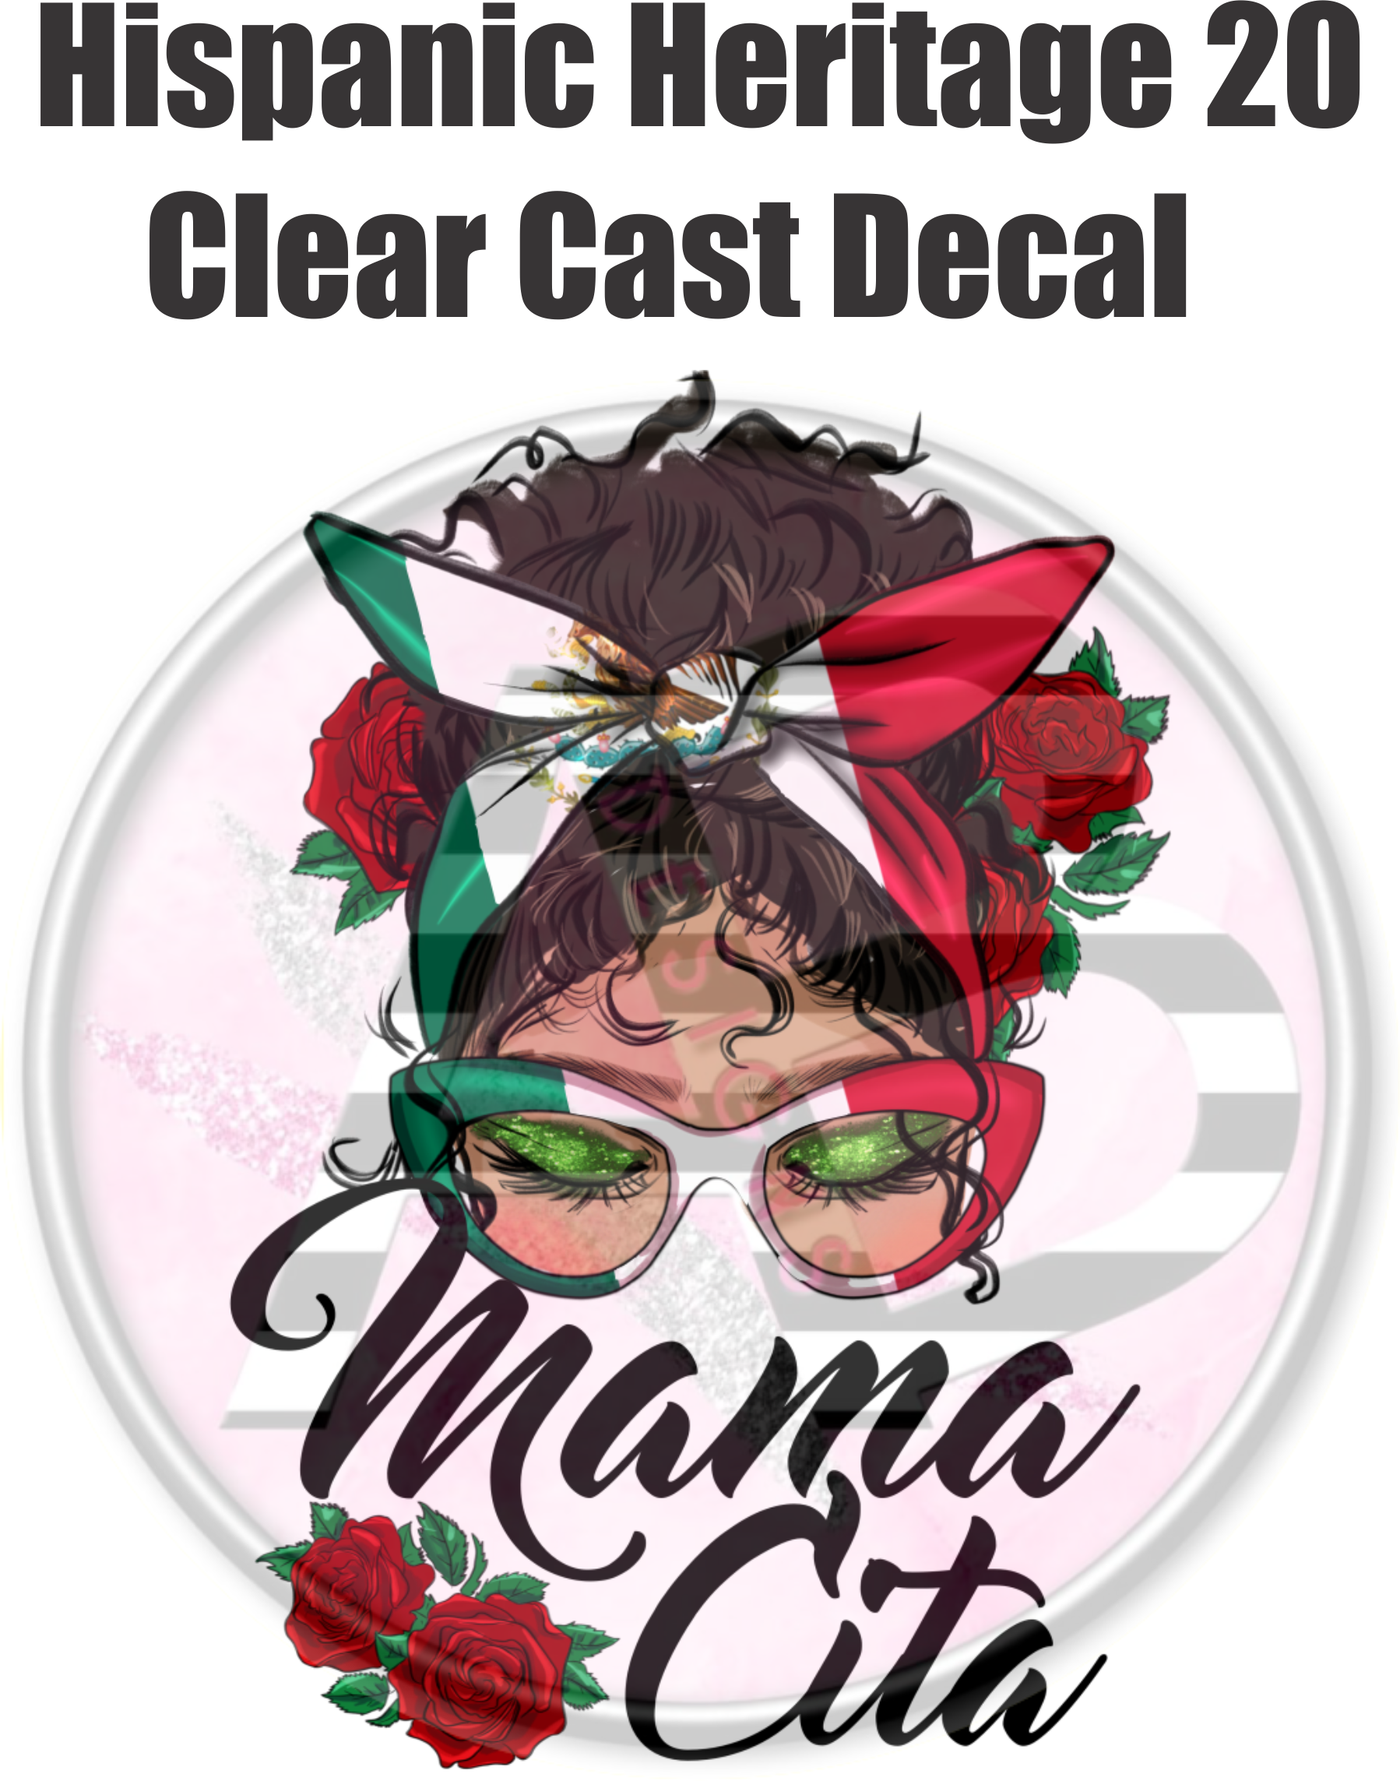 Hispanic Heritage 20 - Clear Cast Decal